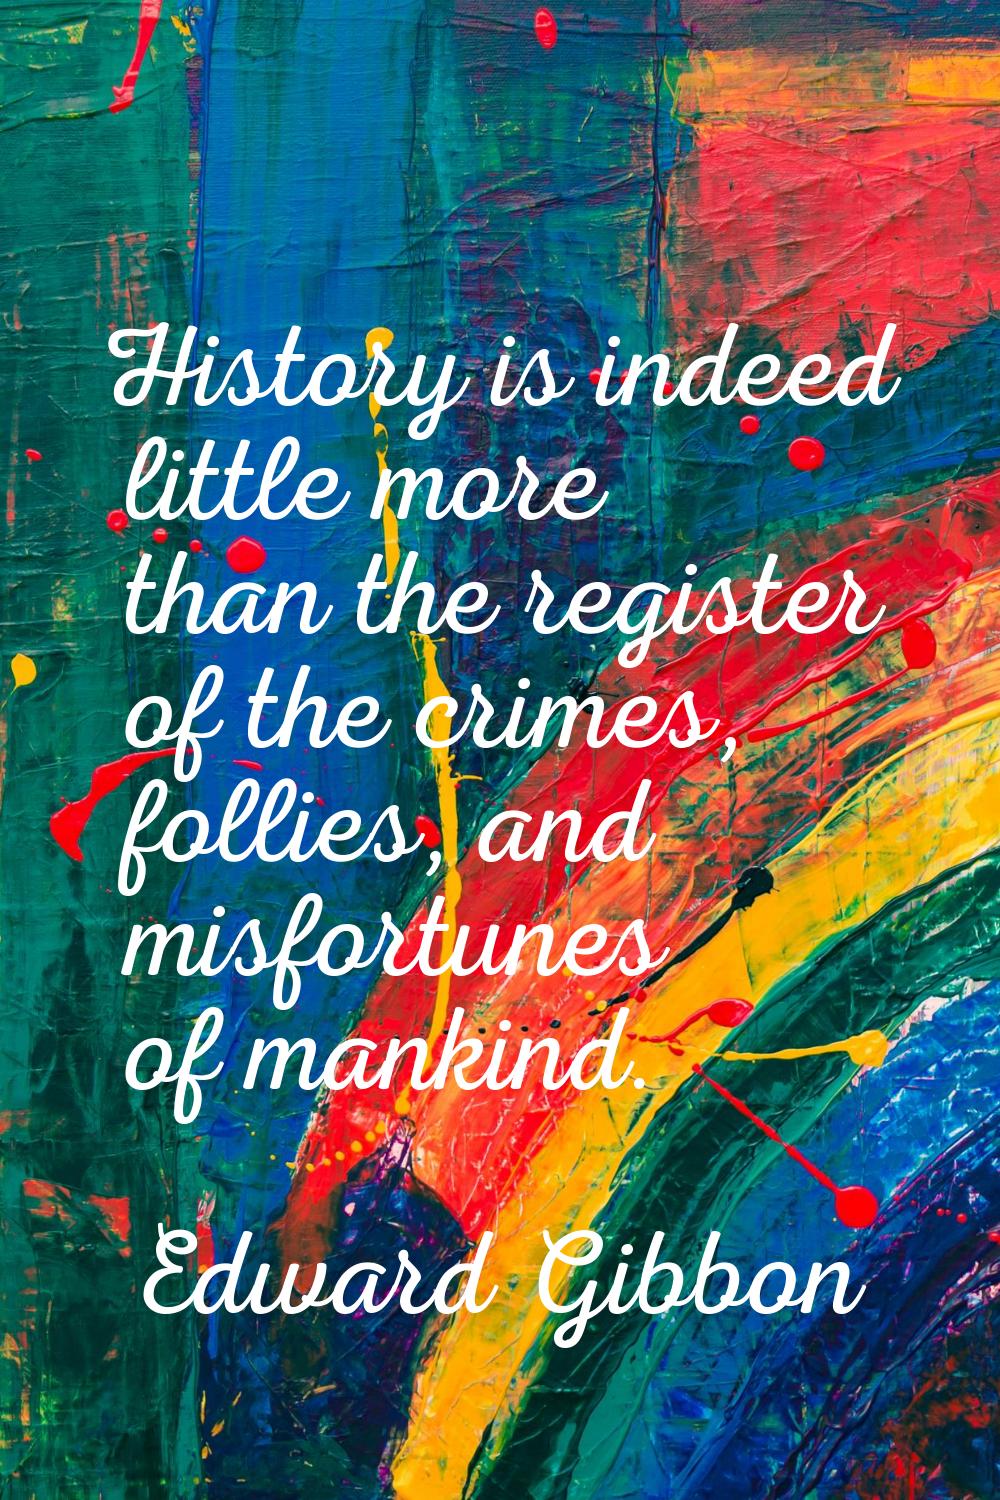 History is indeed little more than the register of the crimes, follies, and misfortunes of mankind.